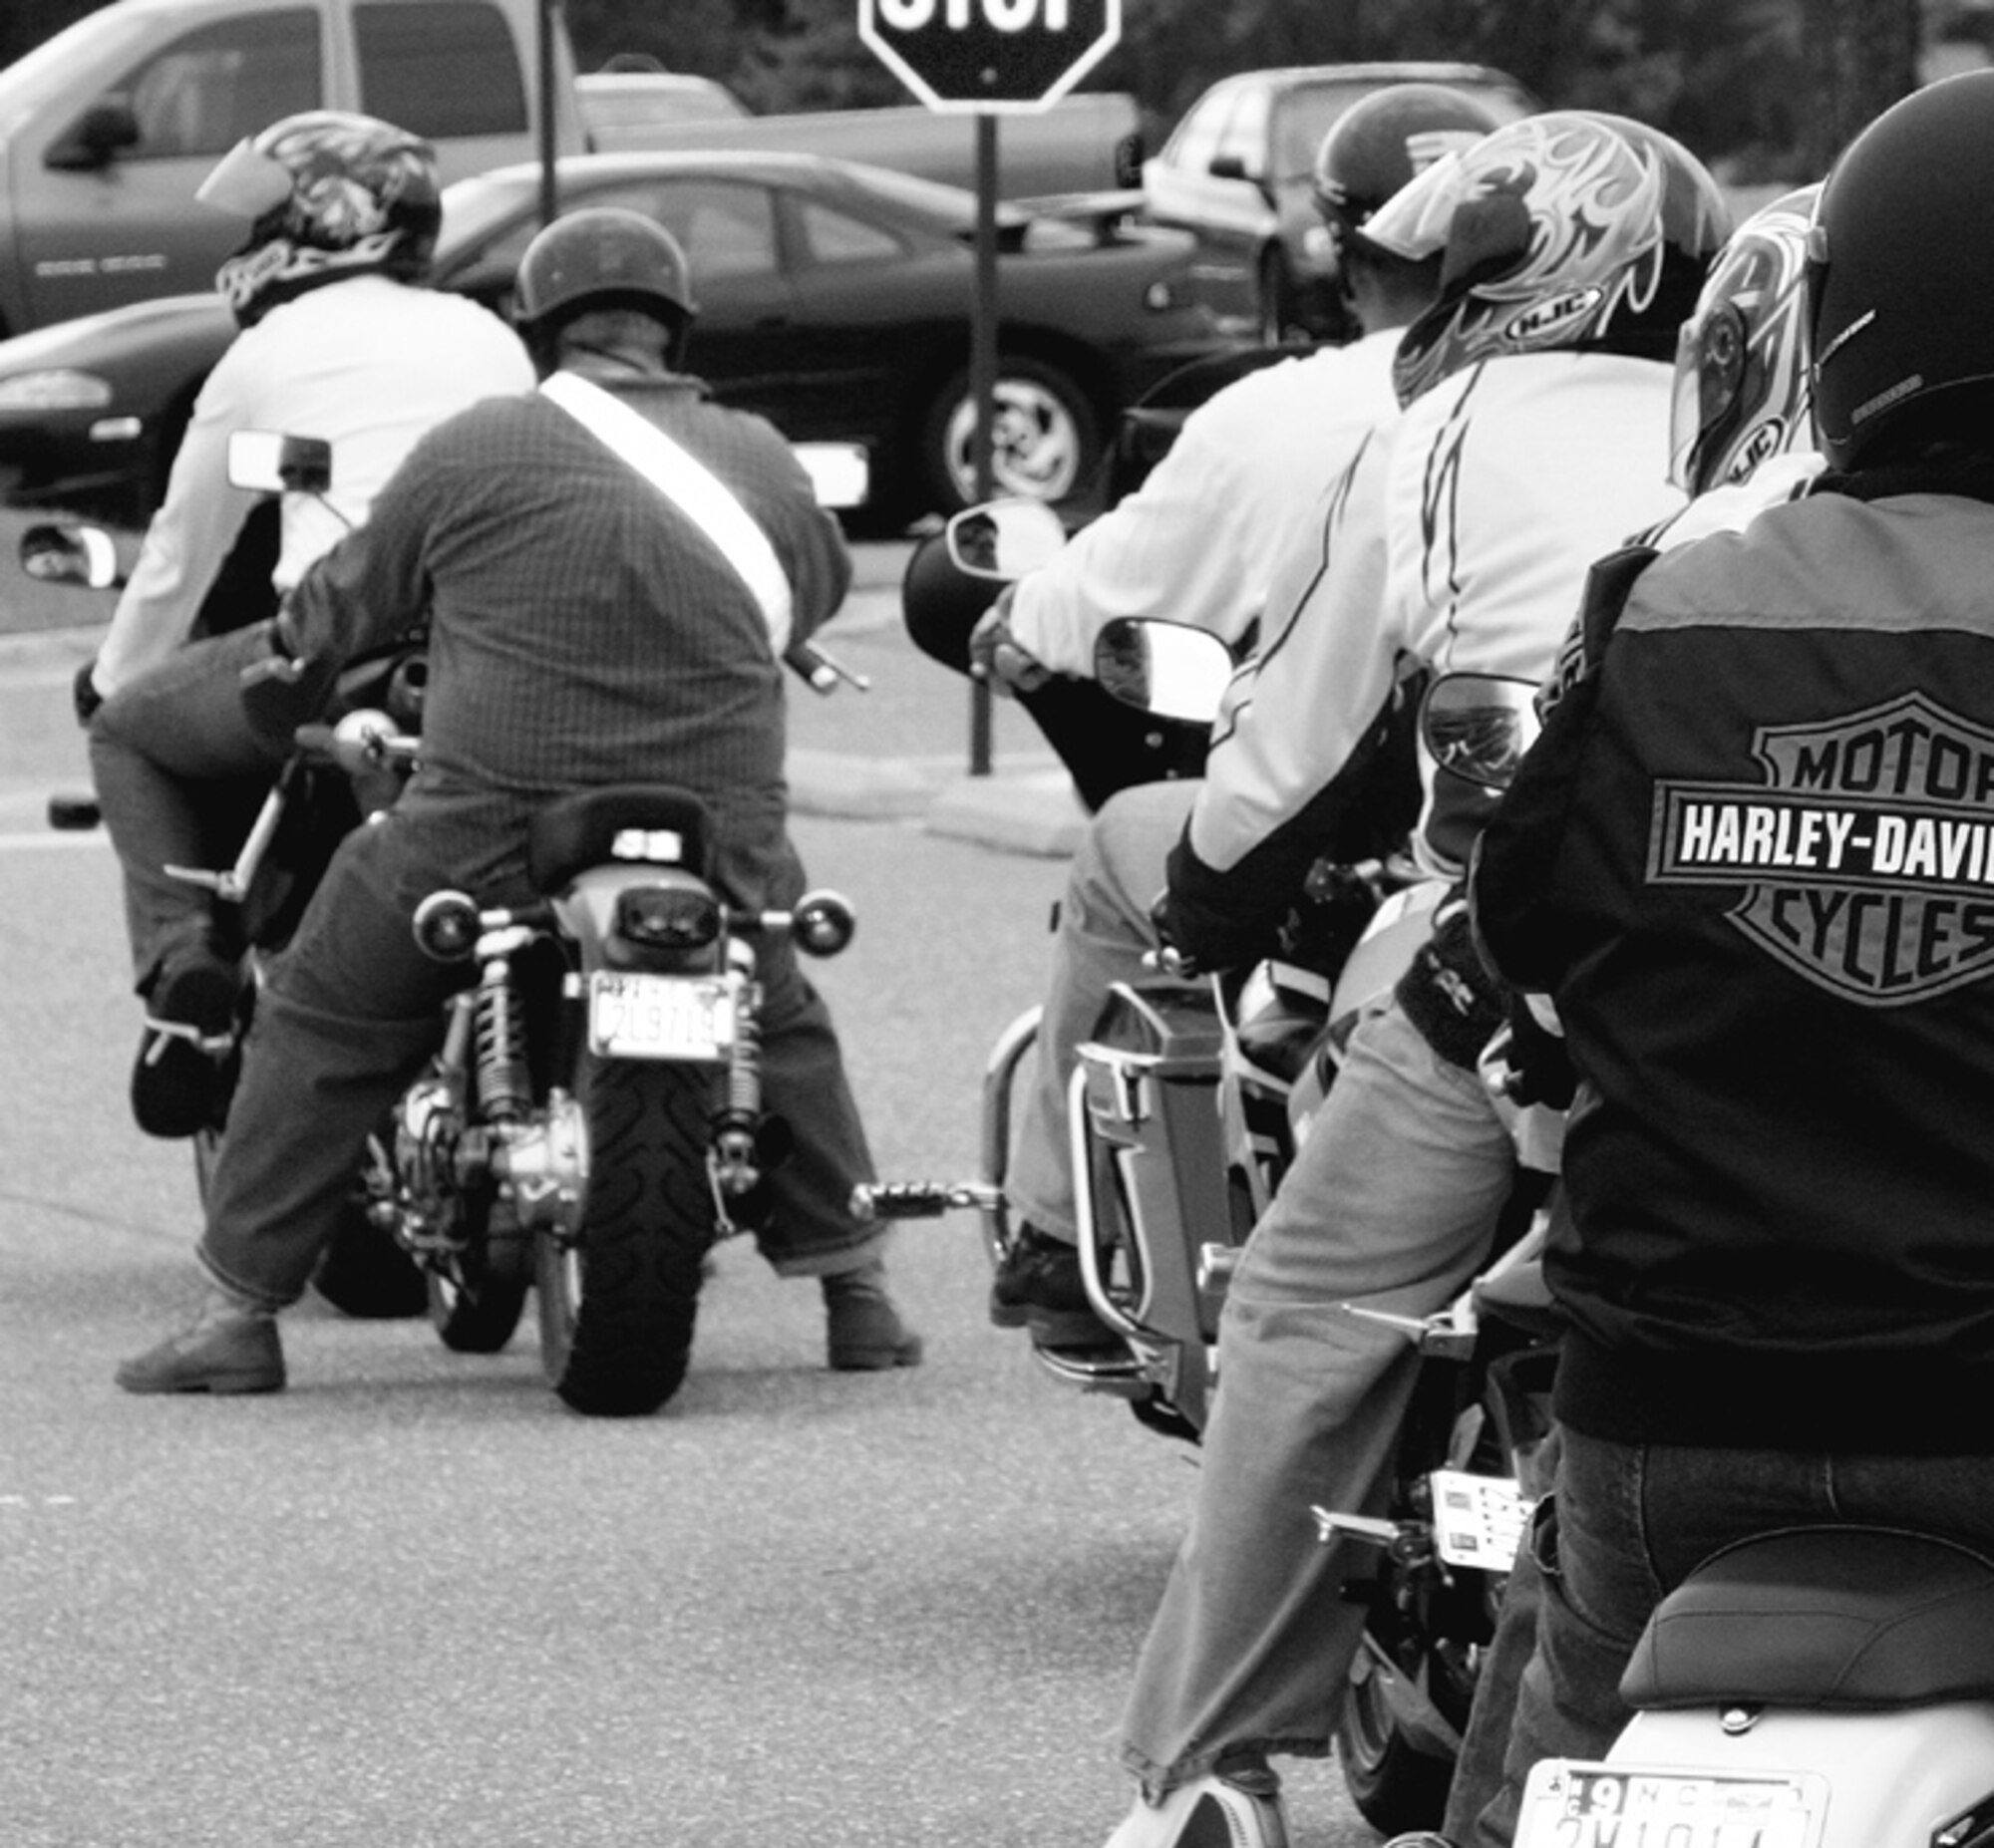 Anyone who rides must take a Motorcycle Safety Foundation-approved class, either the Basic Riders Course or the Experienced Riders Course. Plus, anyone stationed at Pope who rides a sport bike must take the Strategic Riders Course.